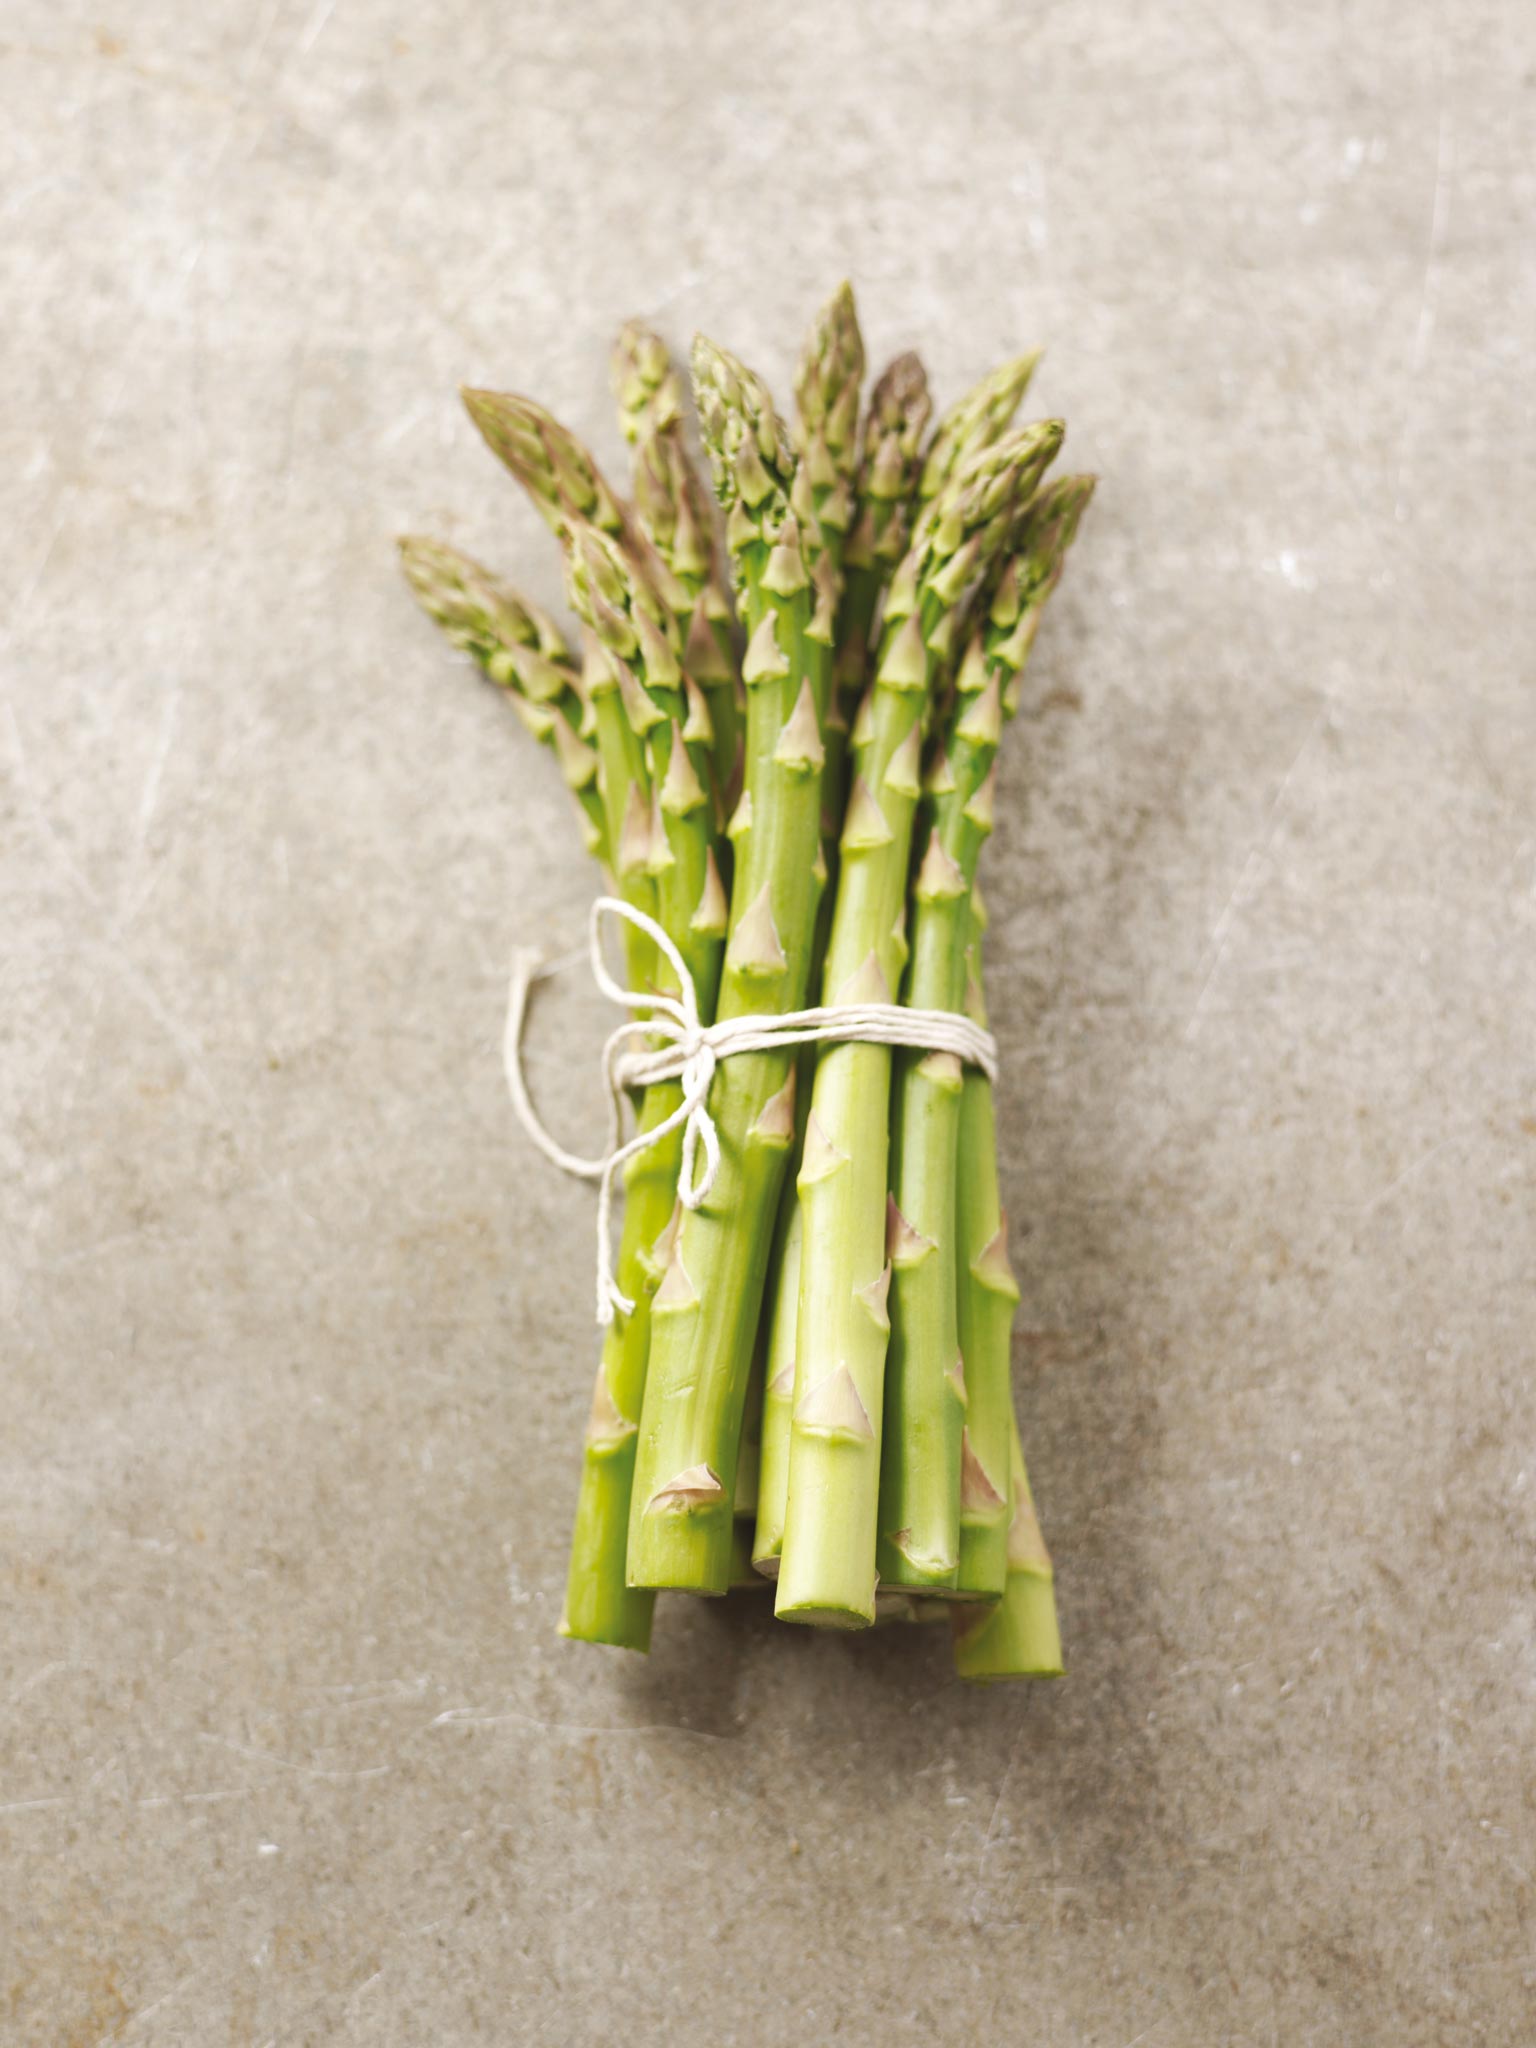 I doubt that my asparagus can be all that “locally
sourced” if I’m eating it in Soho